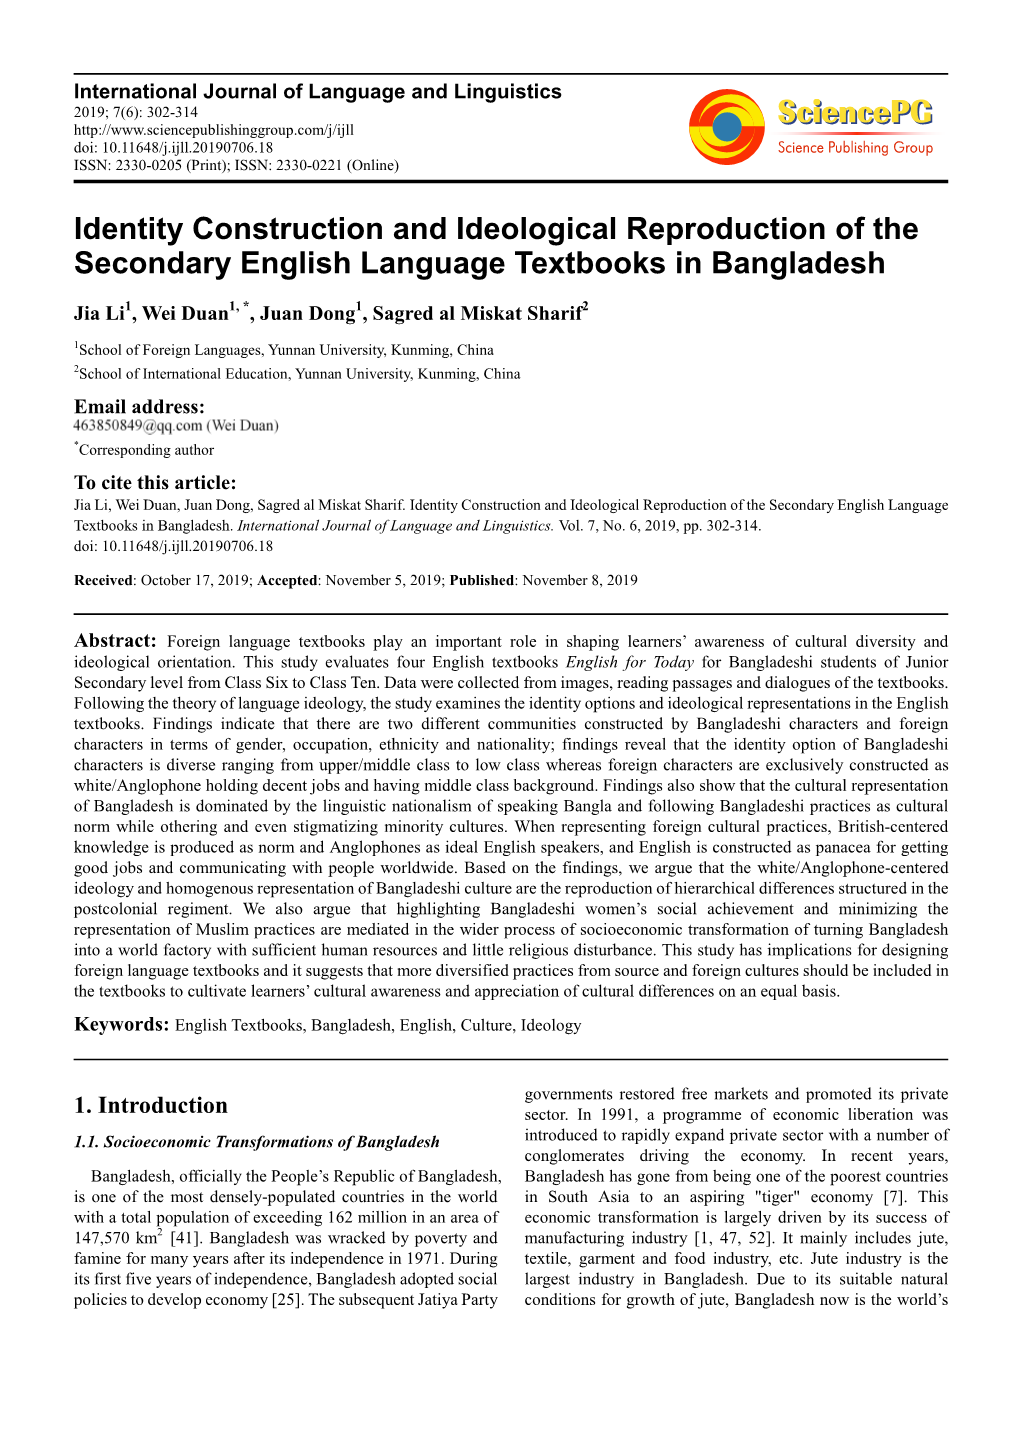 Identity Construction and Ideological Reproduction of the Secondary English Language Textbooks in Bangladesh